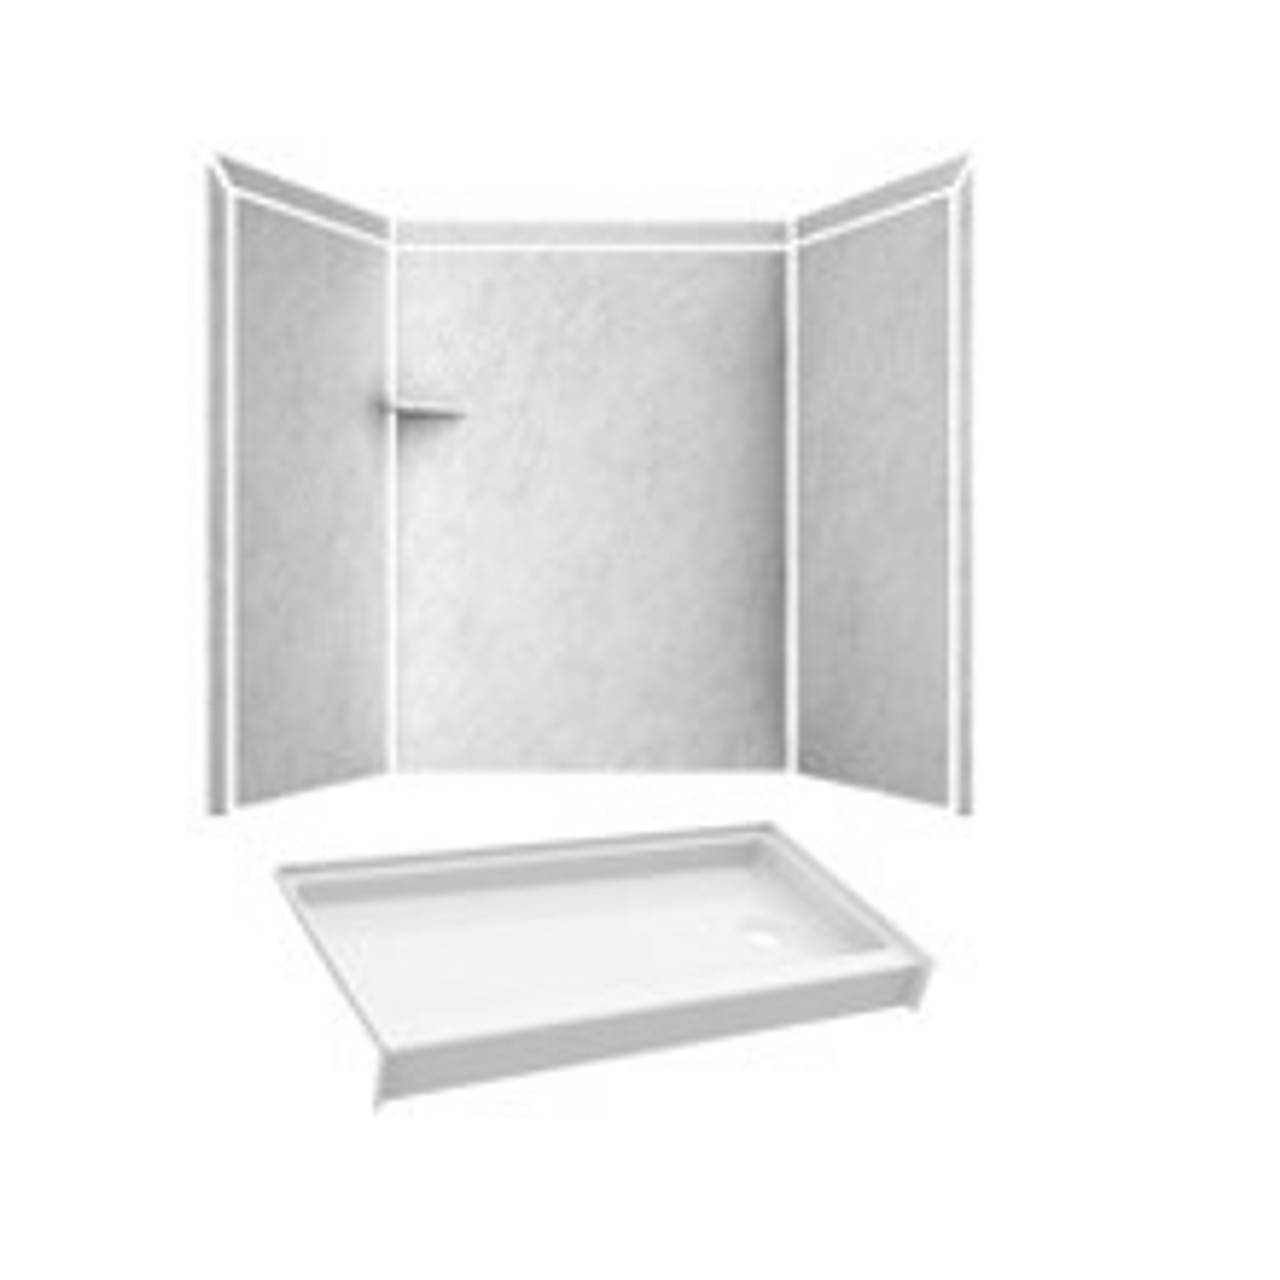 Standard Shower Bases & Wall Surrounds